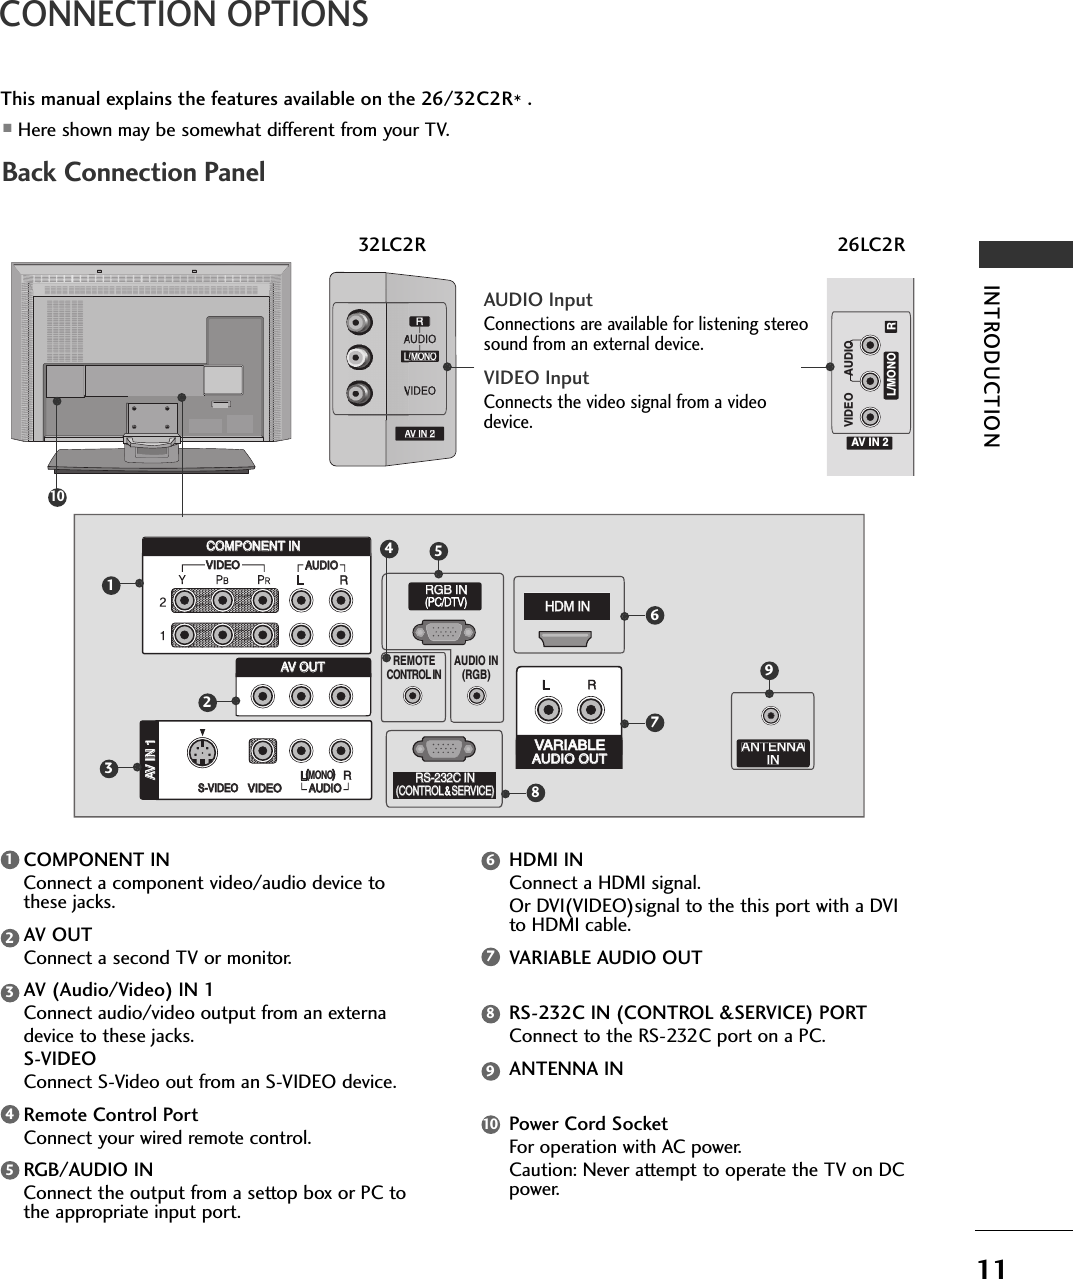 11CONNECTION OPTIONSINTRODUCTIONThis manual explains the features available on the 26/32C2R*.■Here shown may be somewhat different from your TV.VIDEOAV IN 2L/MONO R(            )AUDIORS-232C IN(CONTROL &amp; SERVICE)HDM INVIDEOS-VIDEOAV IN 1AUDIO OUTVARIABLEVIDEOAUDIOCOMPONENT INAV OUTAV IN 2/MONORAUDIOREMOTECONTROL INAUDIO IN(RGB)MONO(                        )AUDIOAUDIORGB INRS-232C INRS-232C IN(CONTROL(CONTROL &amp; SERVICE)SERVICE)HDM INHDM INANTENNAINVIDEOVIDEOS-VIDEOS-VIDEOAV IN 1AV IN 1AUDIO OUTAUDIO OUTVARIABLEVARIABLEVIDEOVIDEOAUDIOAUDIOCOMPONENT INCOMPONENT INAV OUTAV OUTBack Connection PanelAUDIO InputConnections are available for listening stereosound from an external device.VIDEO InputConnects the video signal from a videodevice.COMPONENT INConnect a component video/audio device tothese jacks.AV OUTConnect a second TV or monitor.AV (Audio/Video) IN 1 Connect audio/video output from an externadevice to these jacks.S-VIDEO Connect S-Video out from an S-VIDEO device.Remote Control PortConnect your wired remote control.RGB/AUDIO INConnect the output from a settop box or PC tothe appropriate input port.HDMI INConnect a HDMI signal.Or DVI(VIDEO)signal to the this port with a DVIto HDMI cable.VARIABLE AUDIO OUTRS-232C IN (CONTROL &amp;SERVICE) PORTConnect to the RS-232C port on a PC.ANTENNA INPower Cord SocketFor operation with AC power. Caution: Never attempt to operate the TV on DCpower.123176891023455946781032LC2R 26LC2R